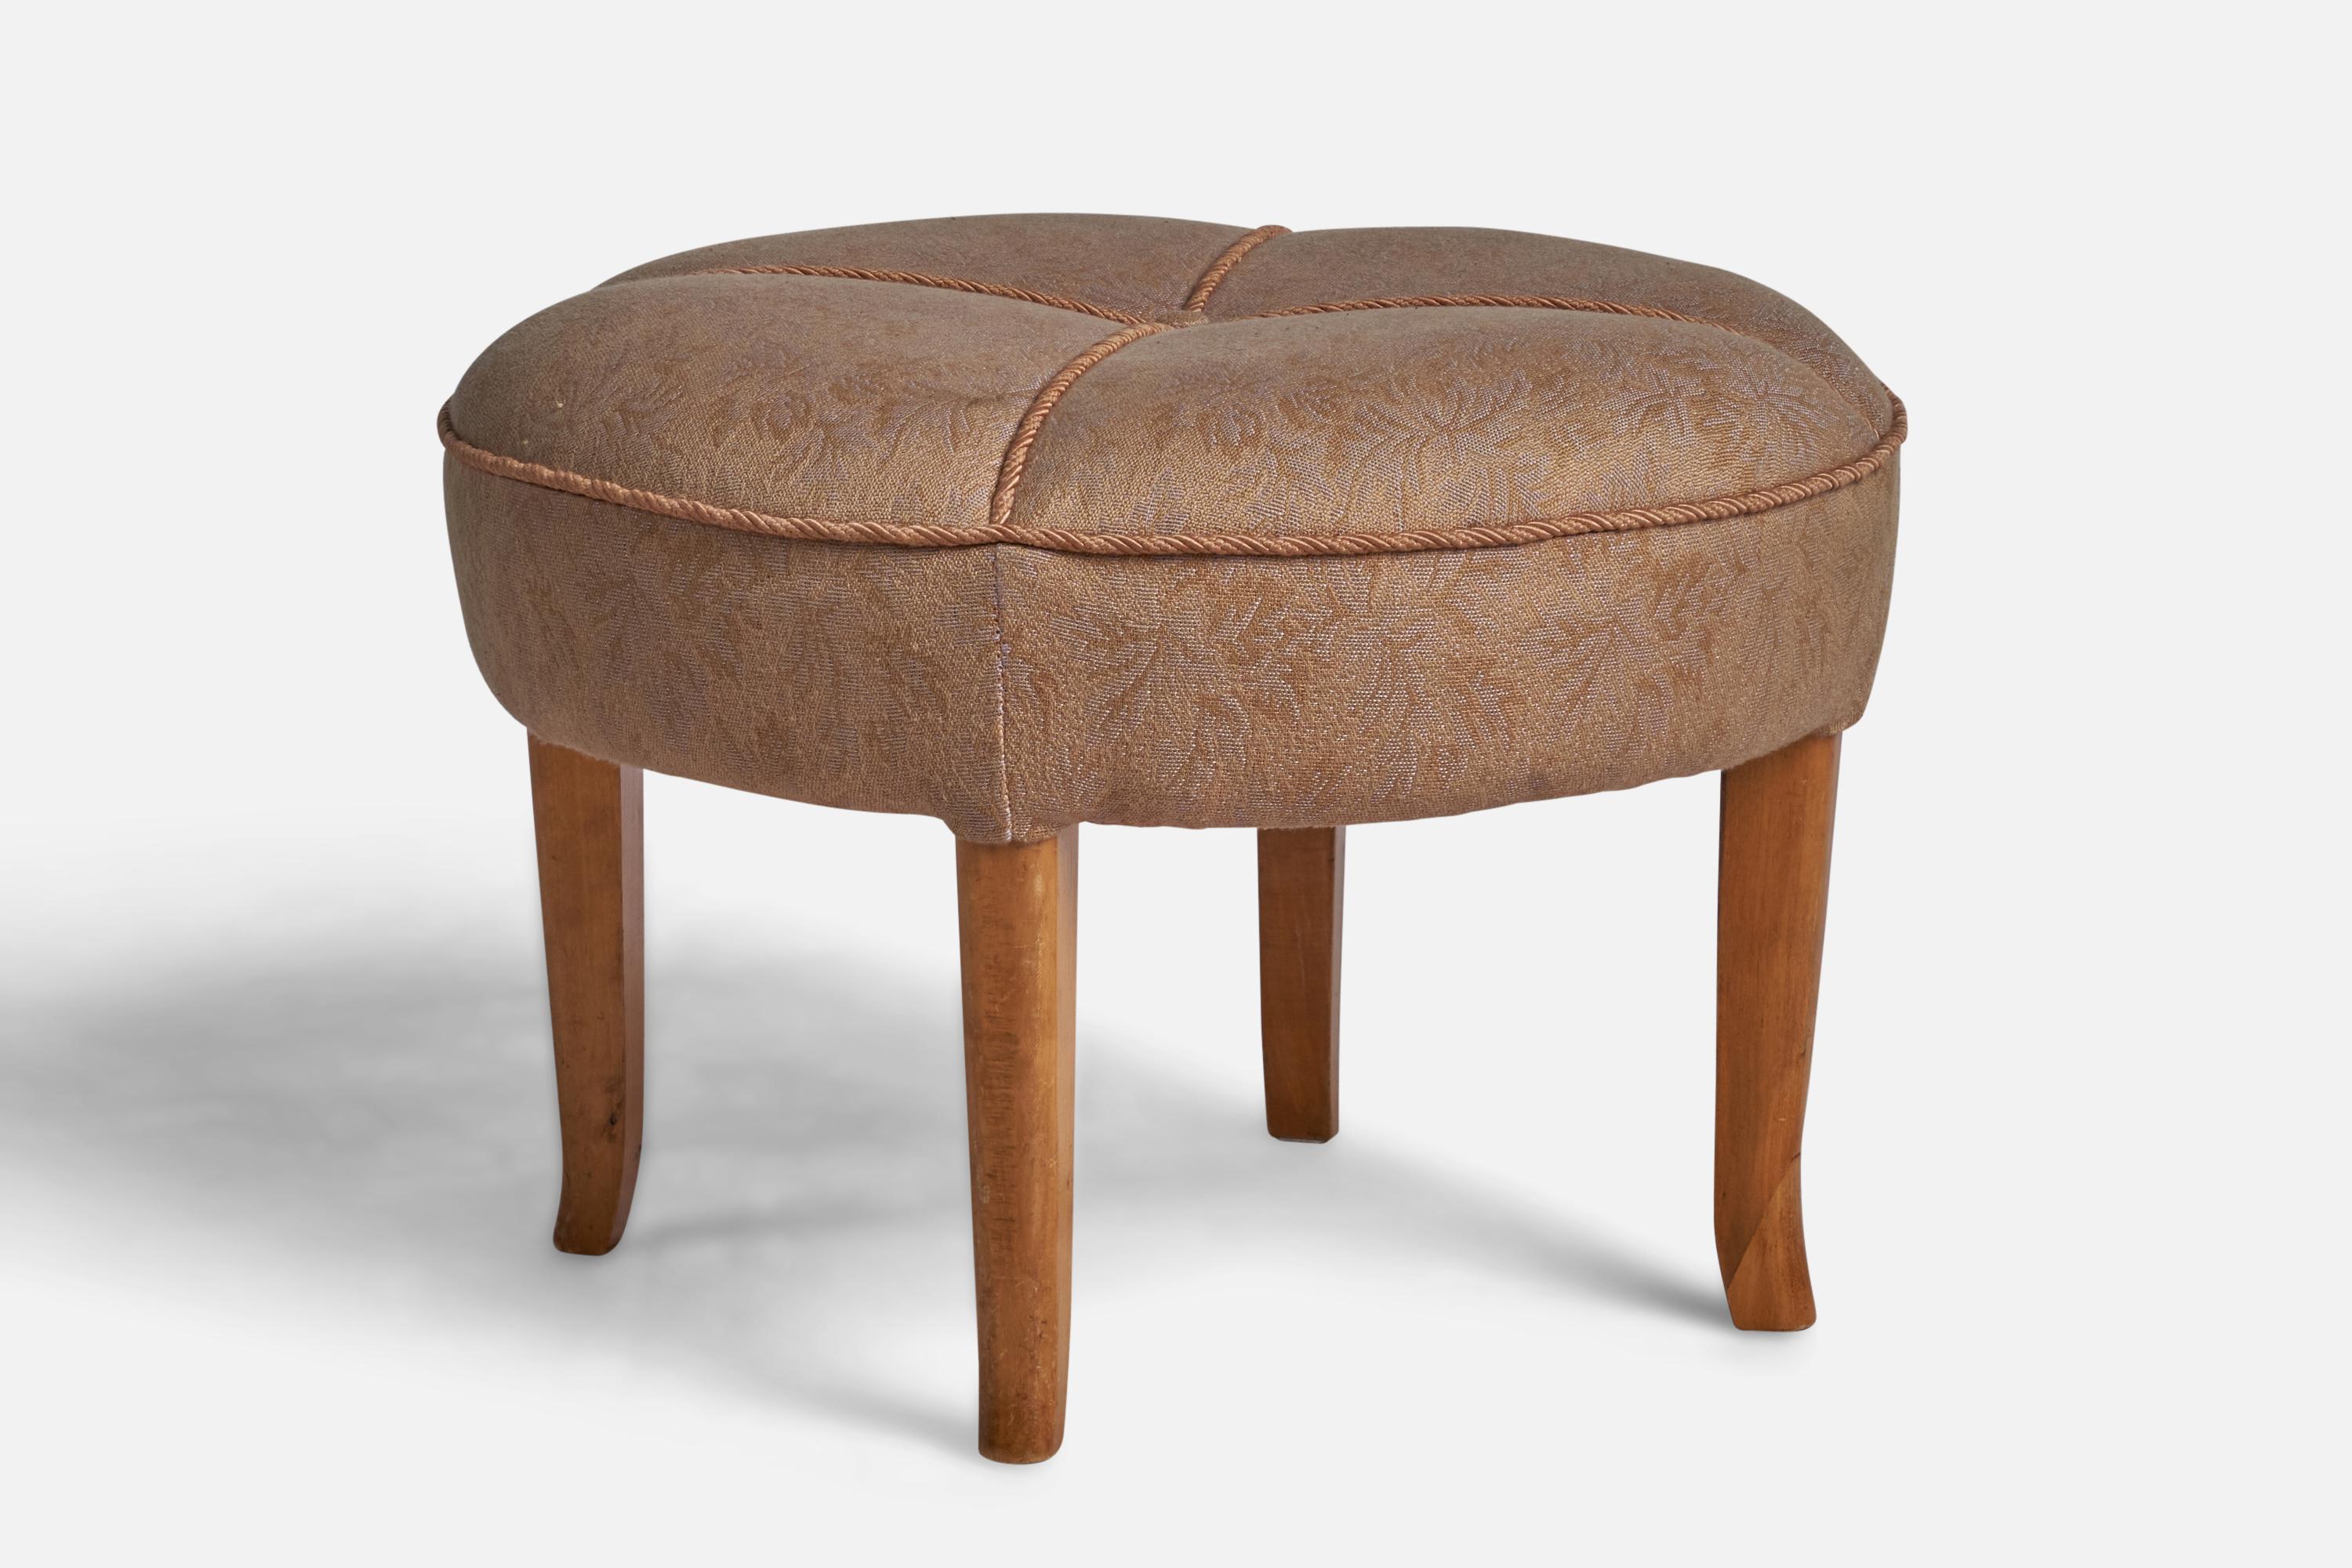 A birch and fabric stool designed and produced in Finland, c. 1940s.